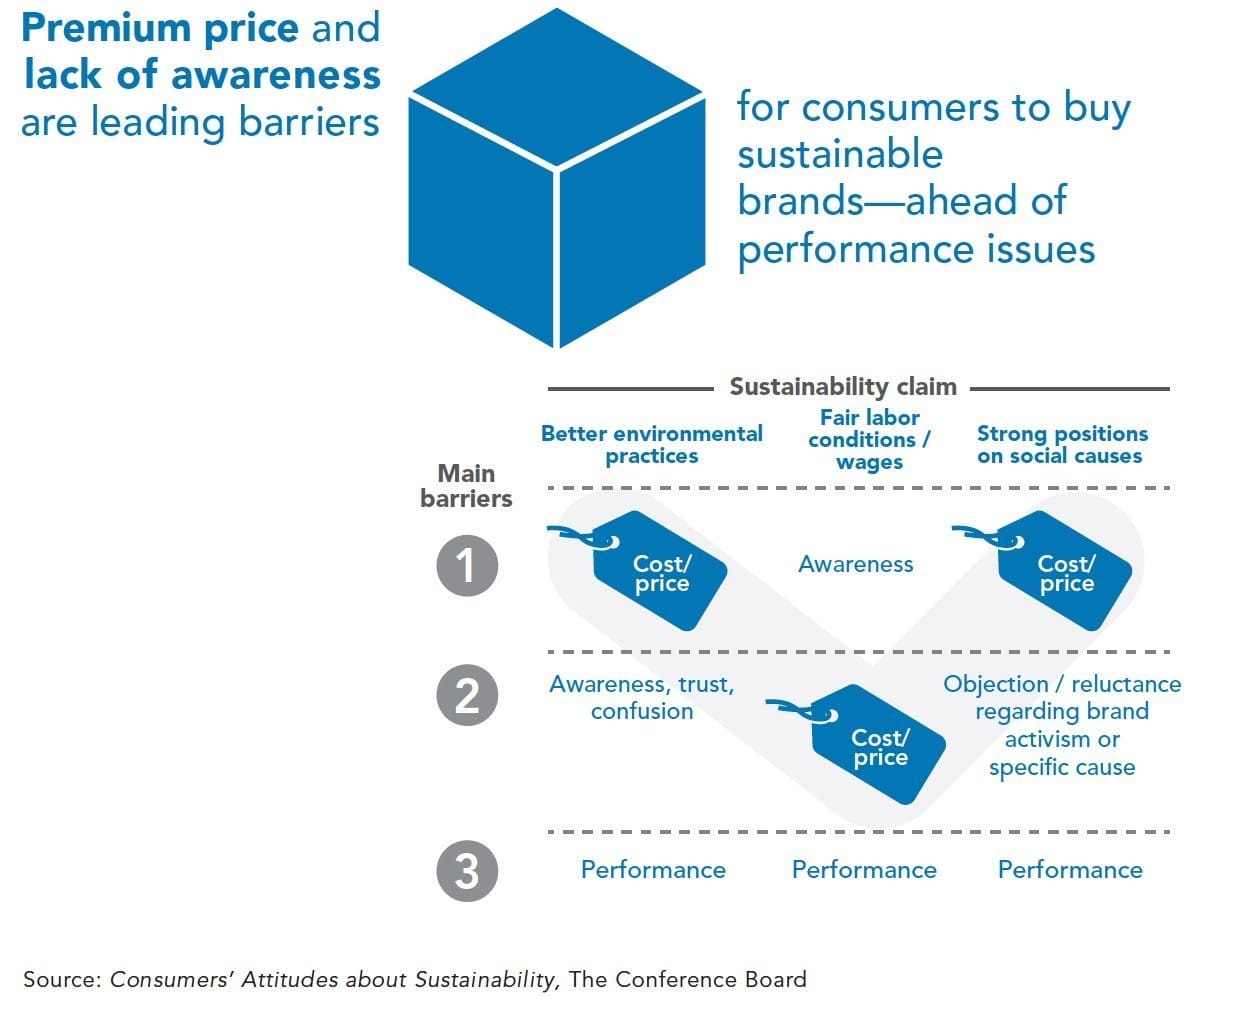 Consumers want to embrace brand sustainability, but PR messaging isn’t getting through